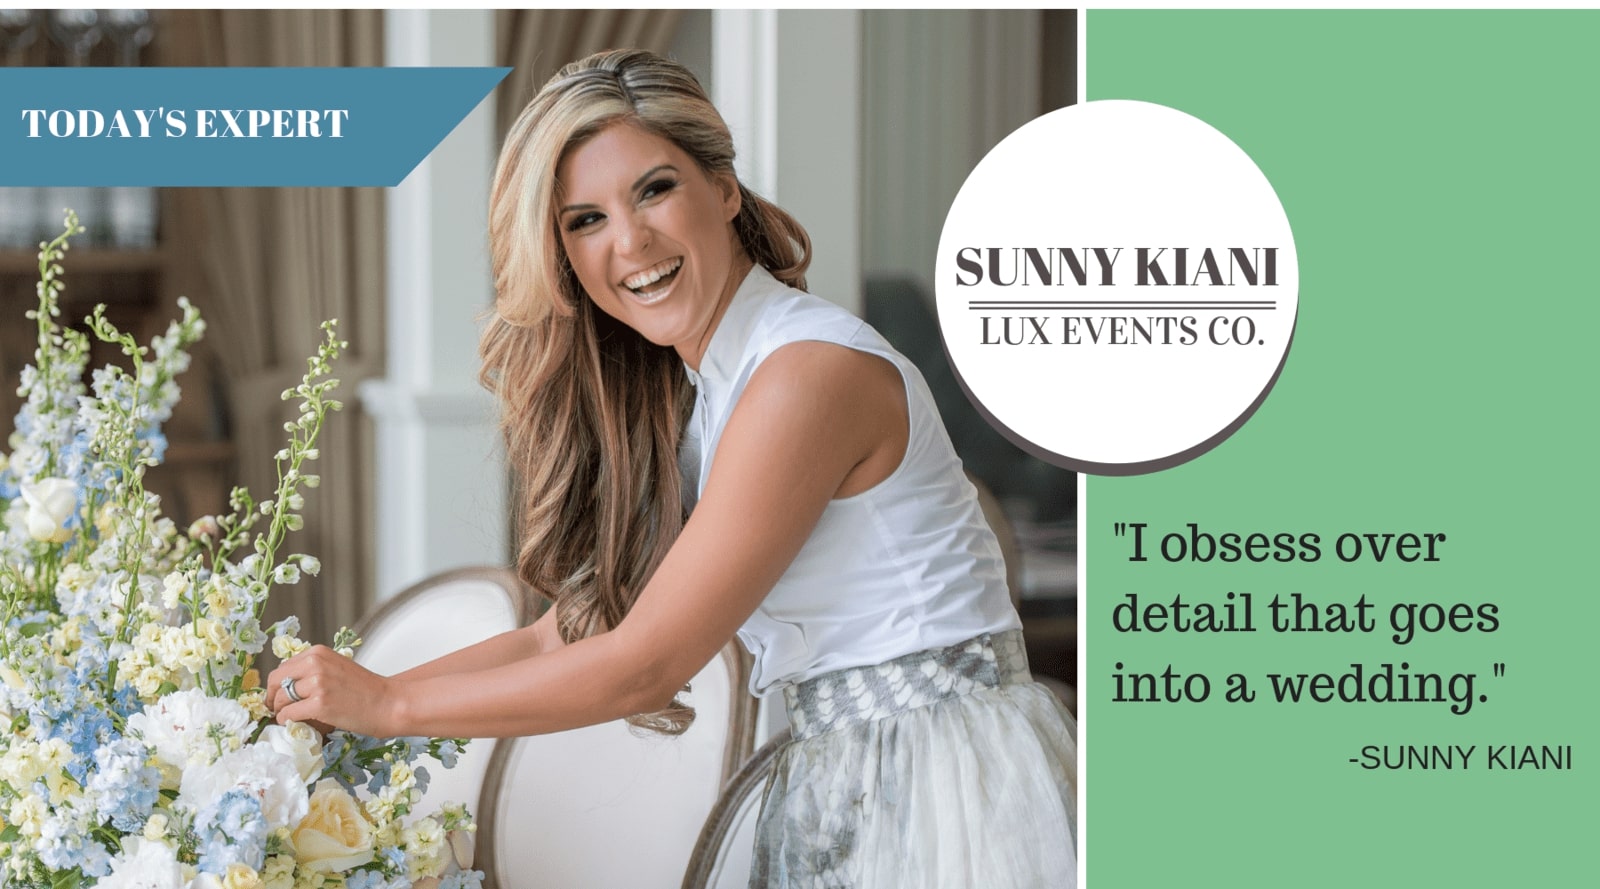 Today's Expert: Interview with Sunny Kiani of Lux Events Co.